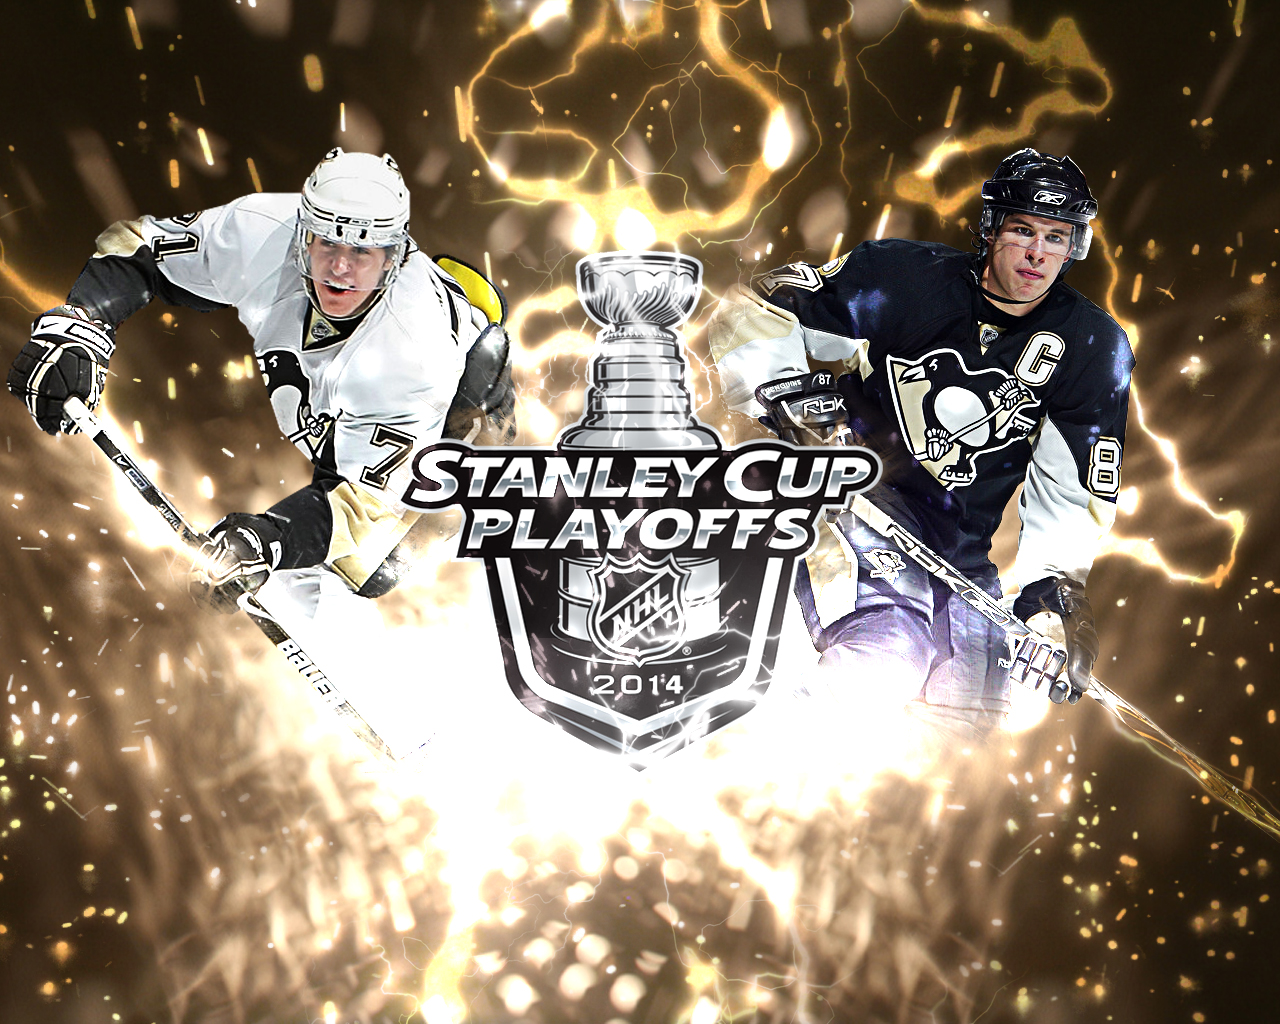 continue reading sidney crosby wallpaper posted by psf on monday